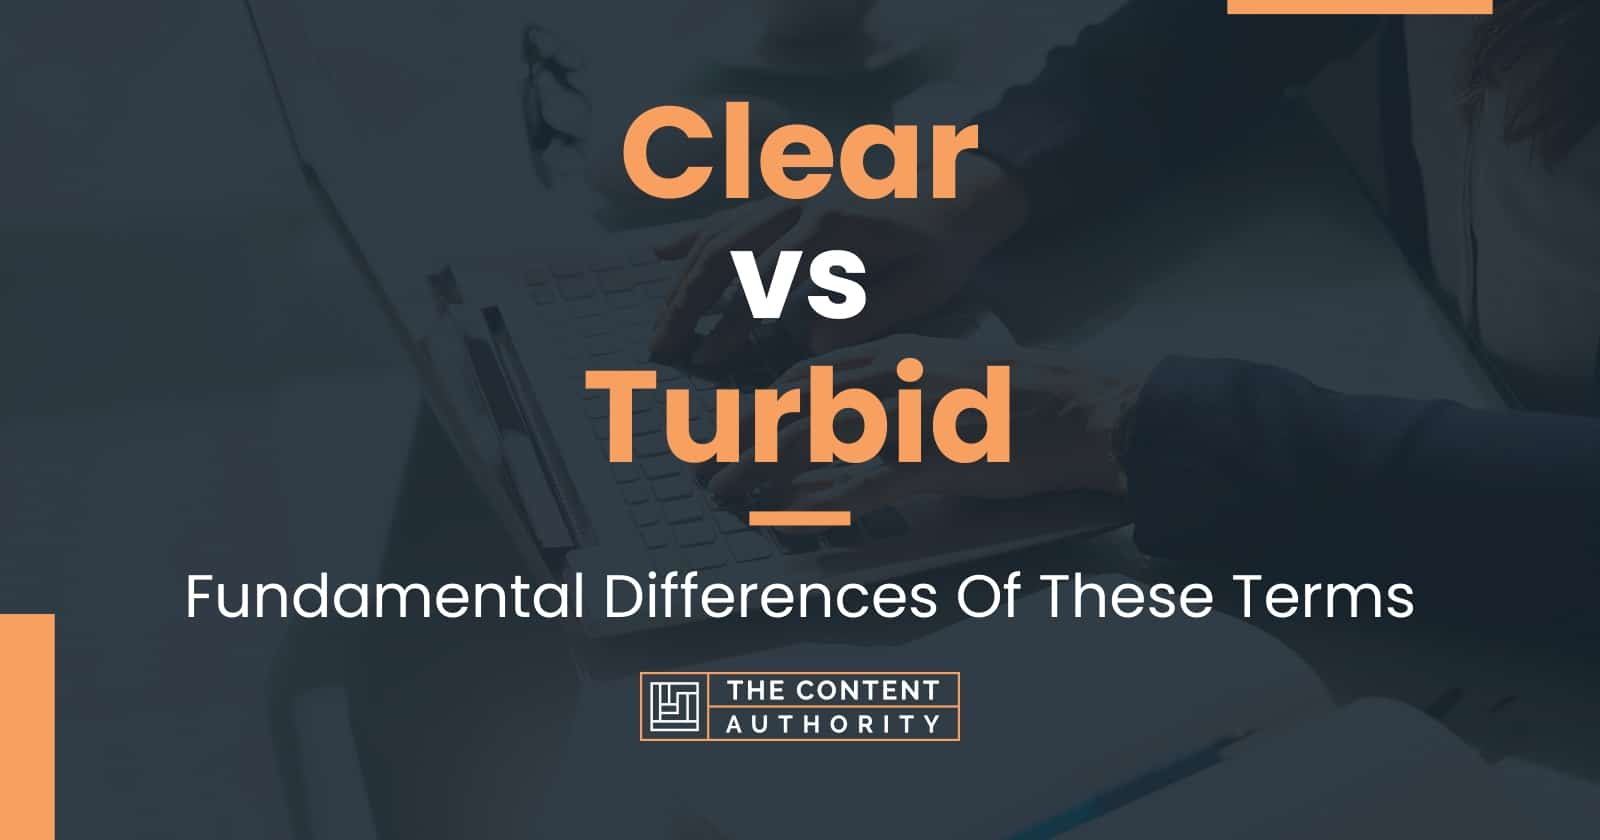 Clear vs Turbid: Fundamental Differences Of These Terms